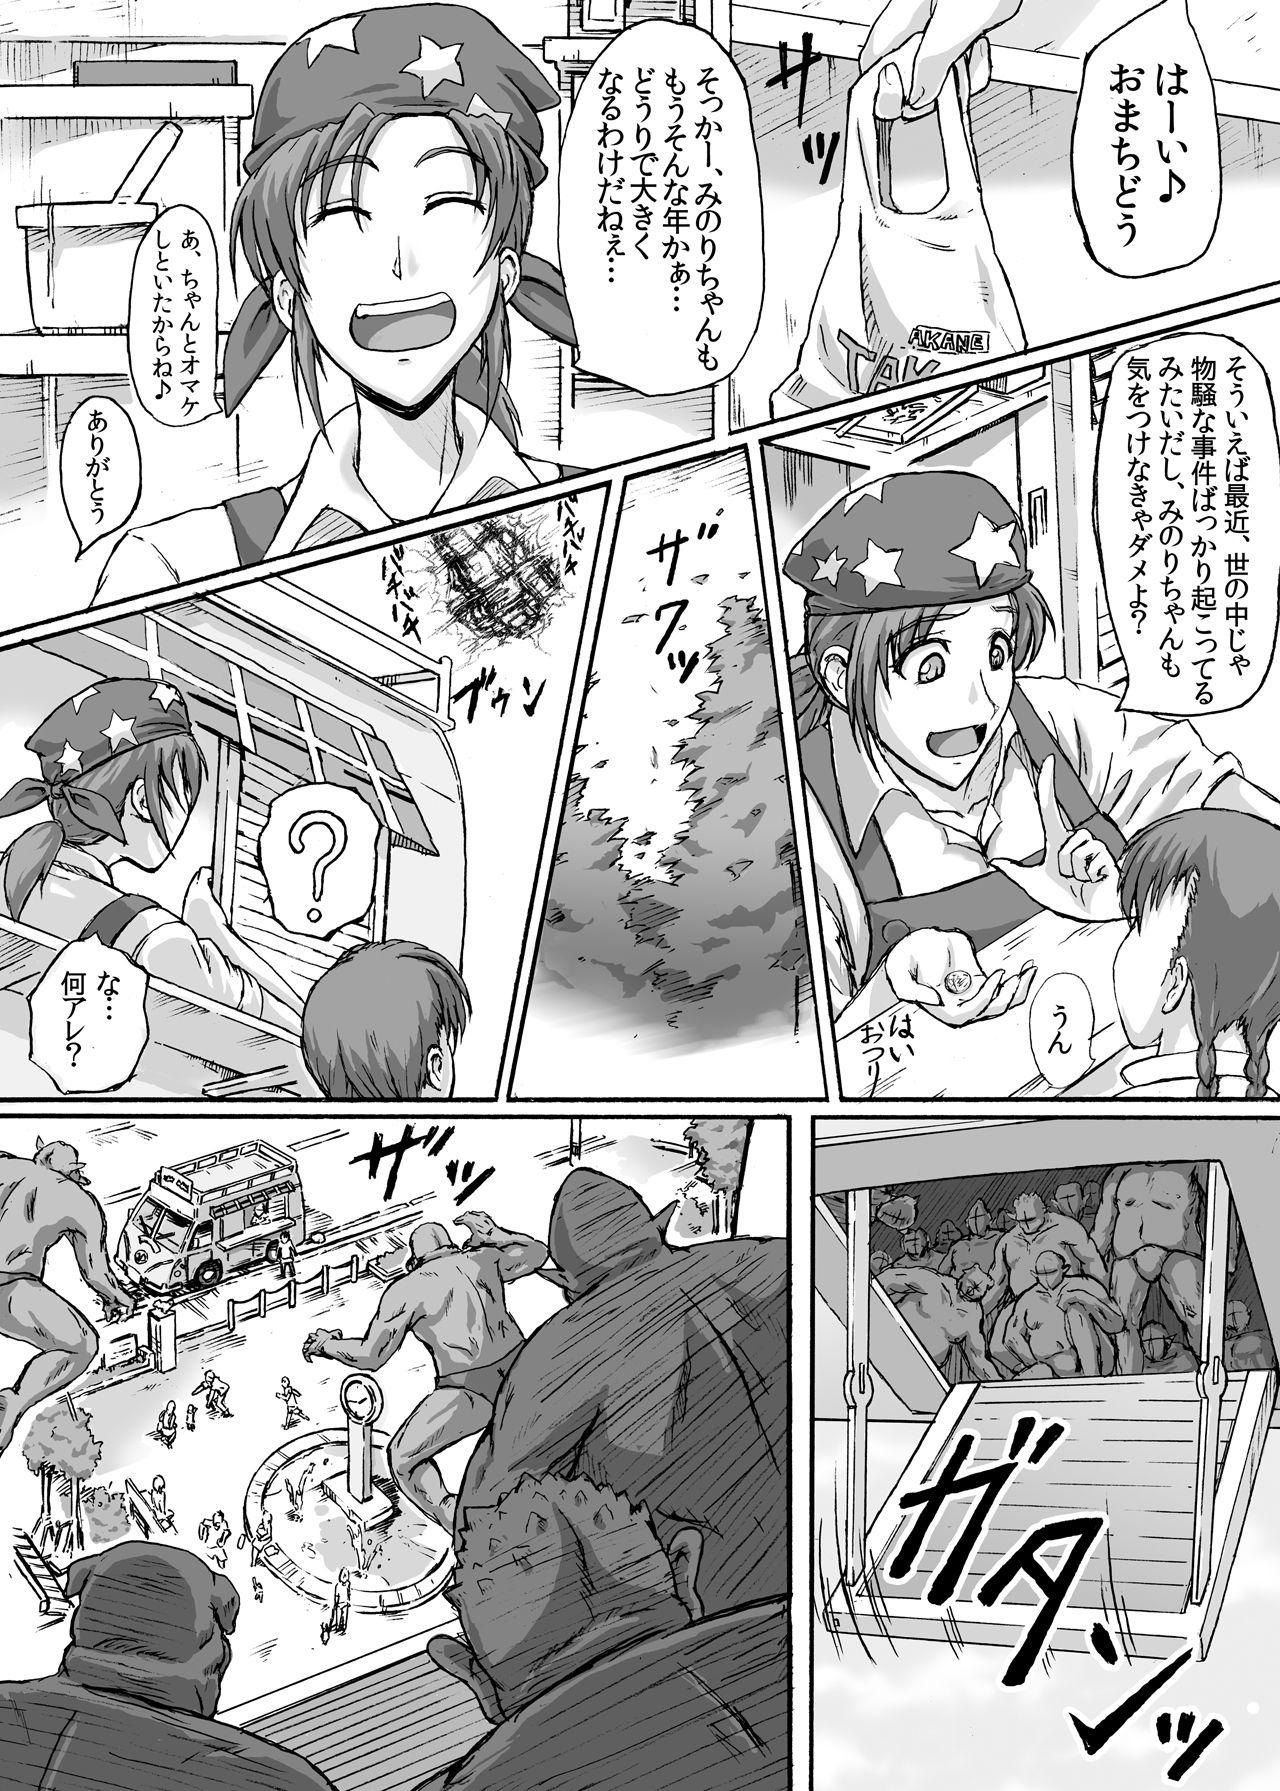 Assfuck Hellcure All Stars Ryona MAX +Plus - Pretty cure Blacksonboys - Page 7